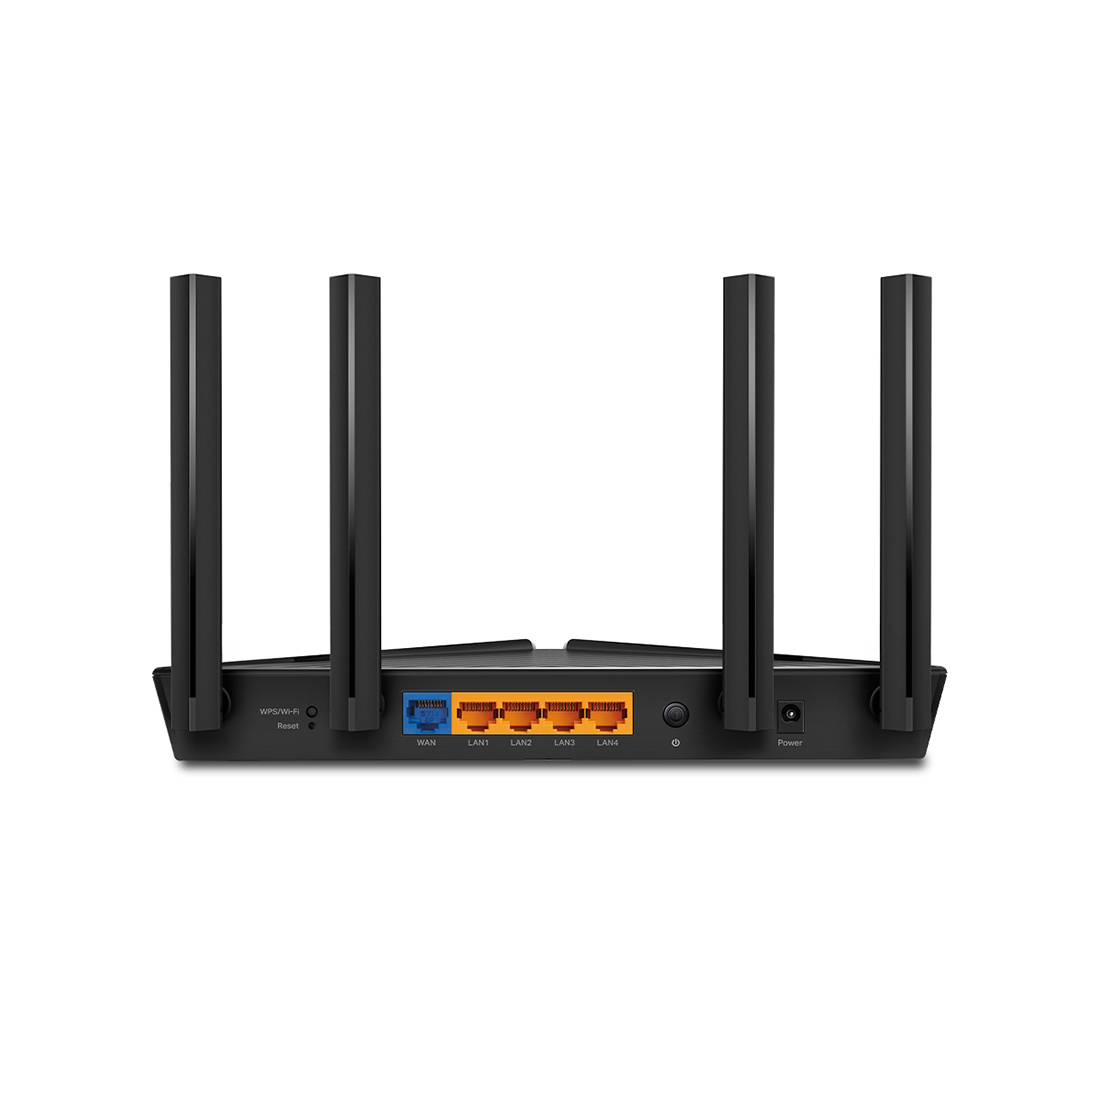 Маршрутизатор TP-Link Archer AX53